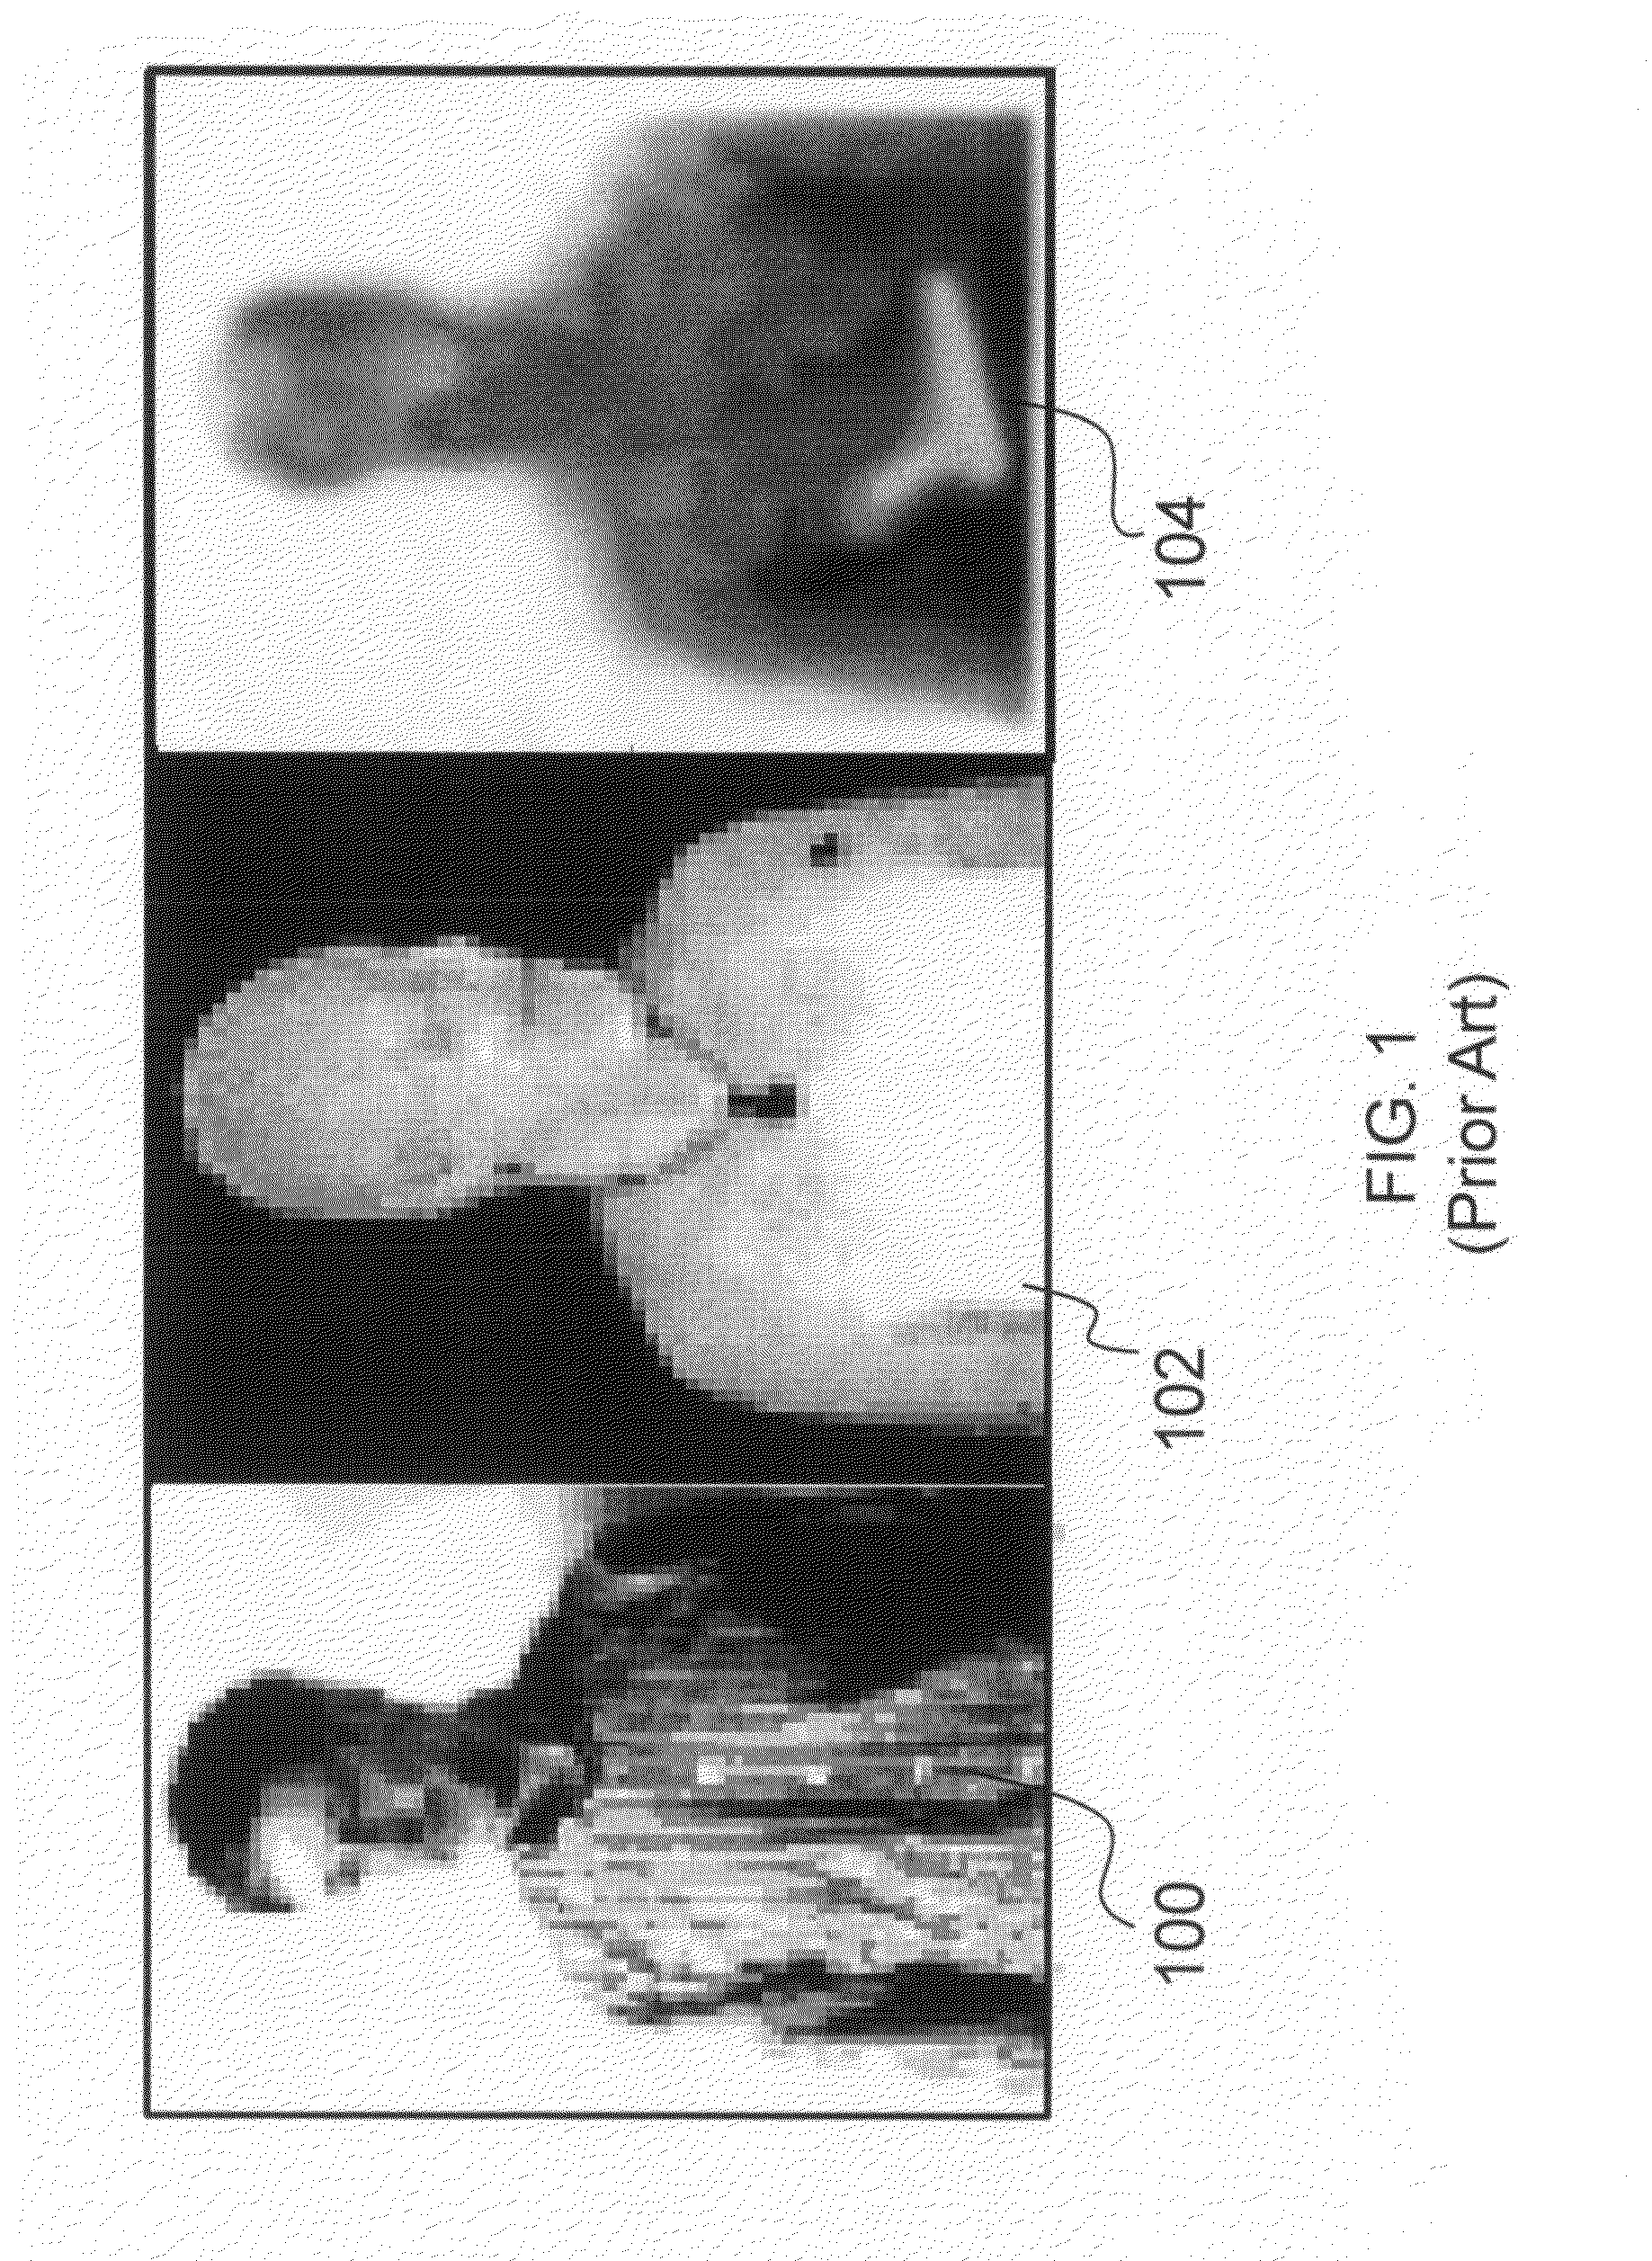 System for anomaly detection using sub-space analysis